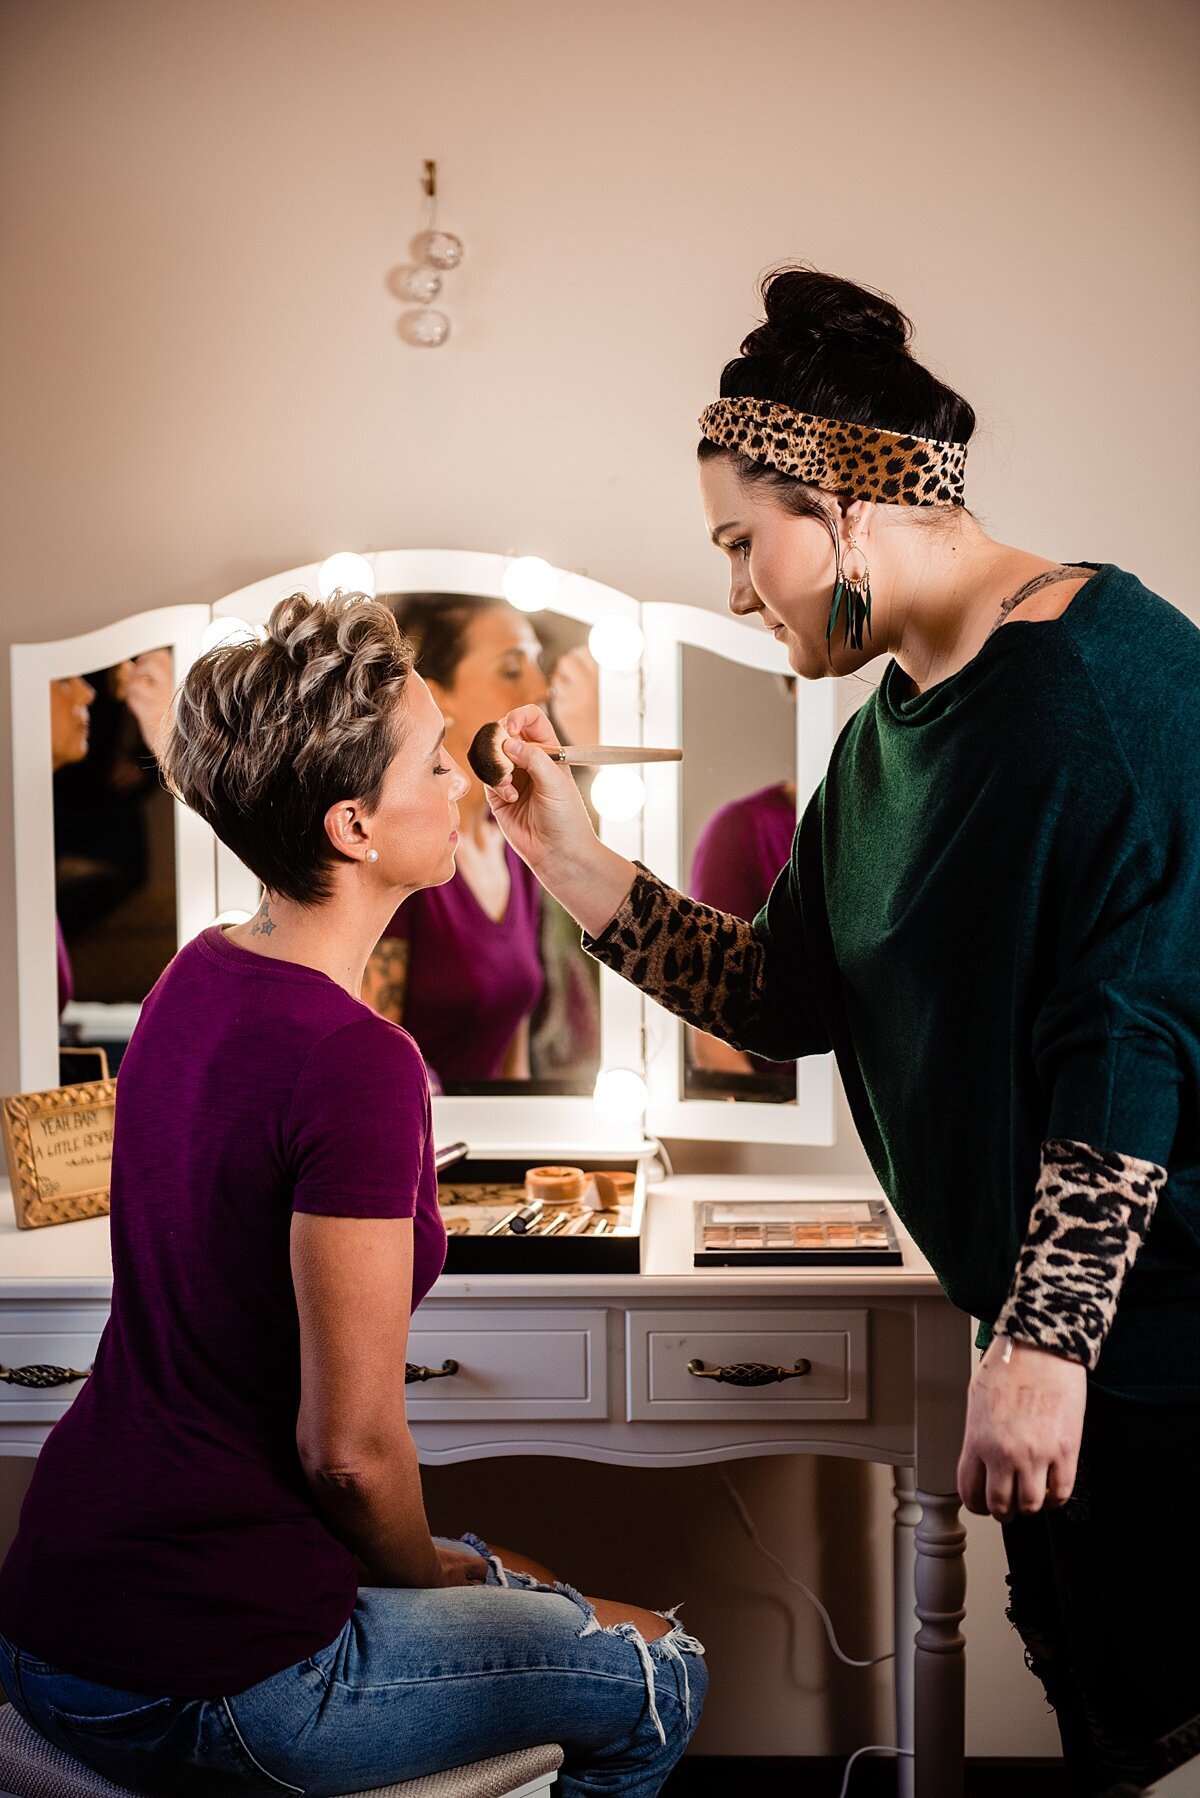 Behind the scenes photo of Molly Brown putting makeup on a bride for a styled photoshoot at The Walnut House